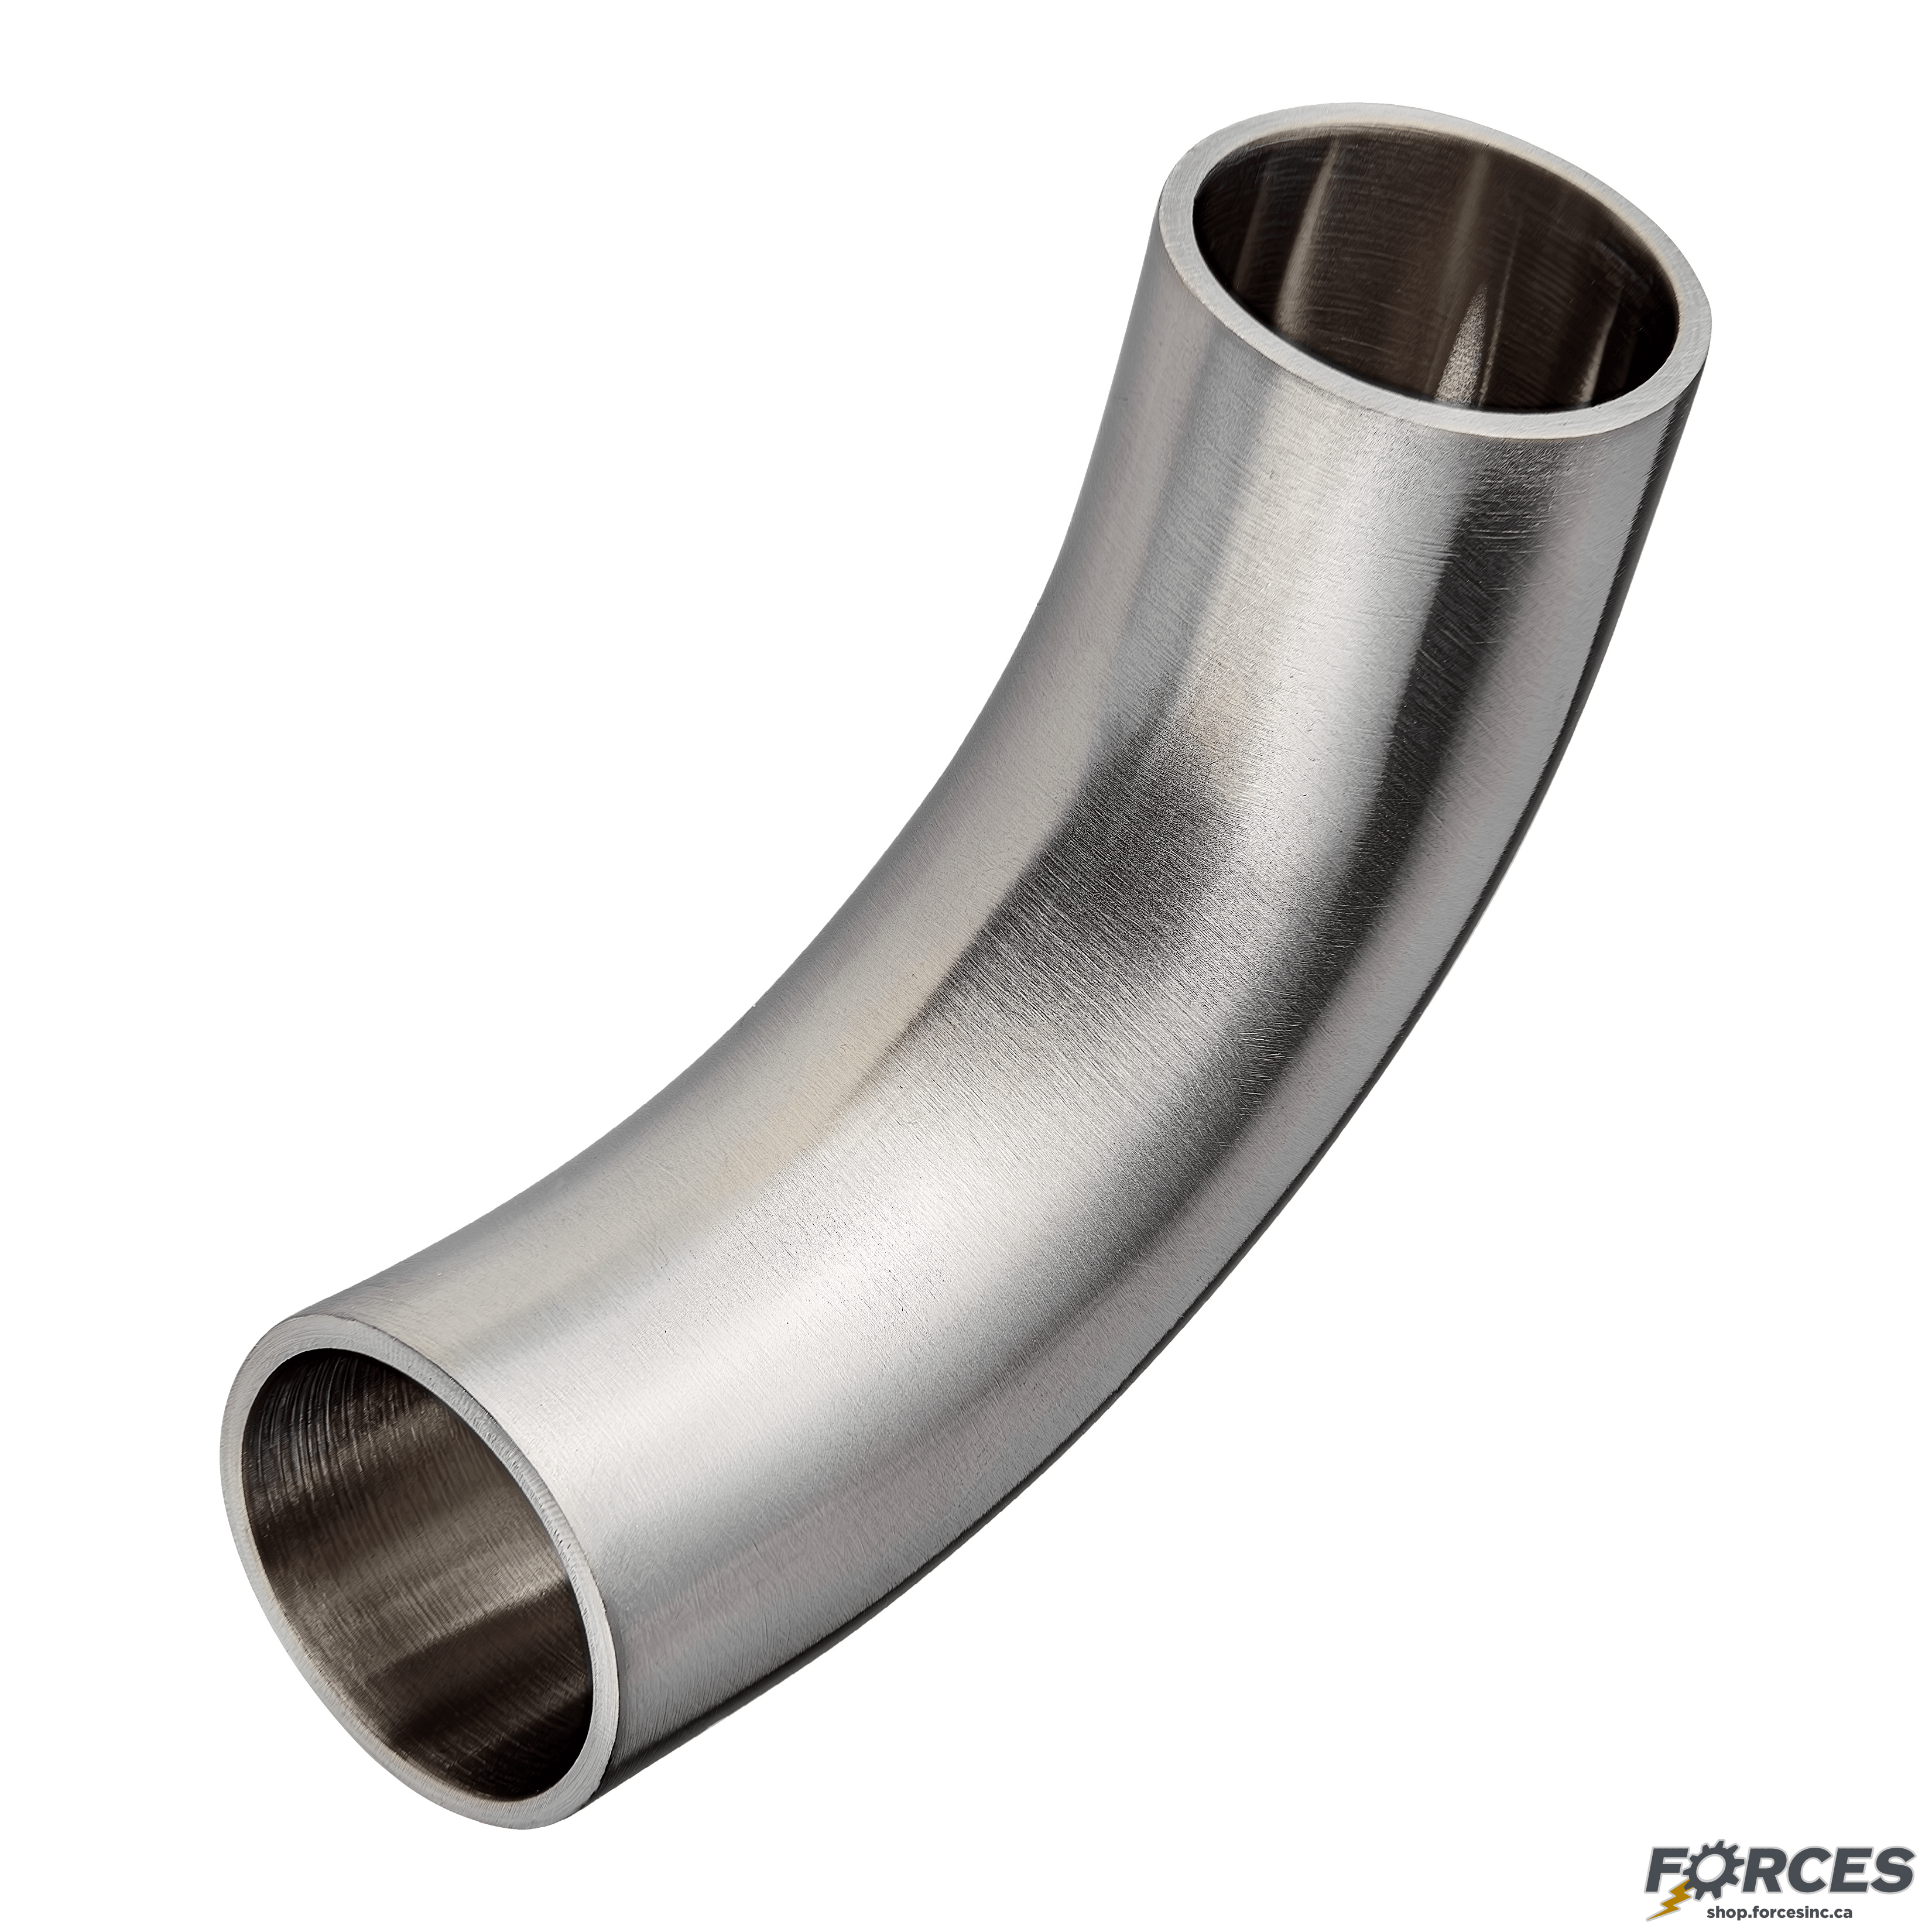 4" Butt Weld 90° Elbow Long Tangent - Stainless Steel 304 - Forces Inc